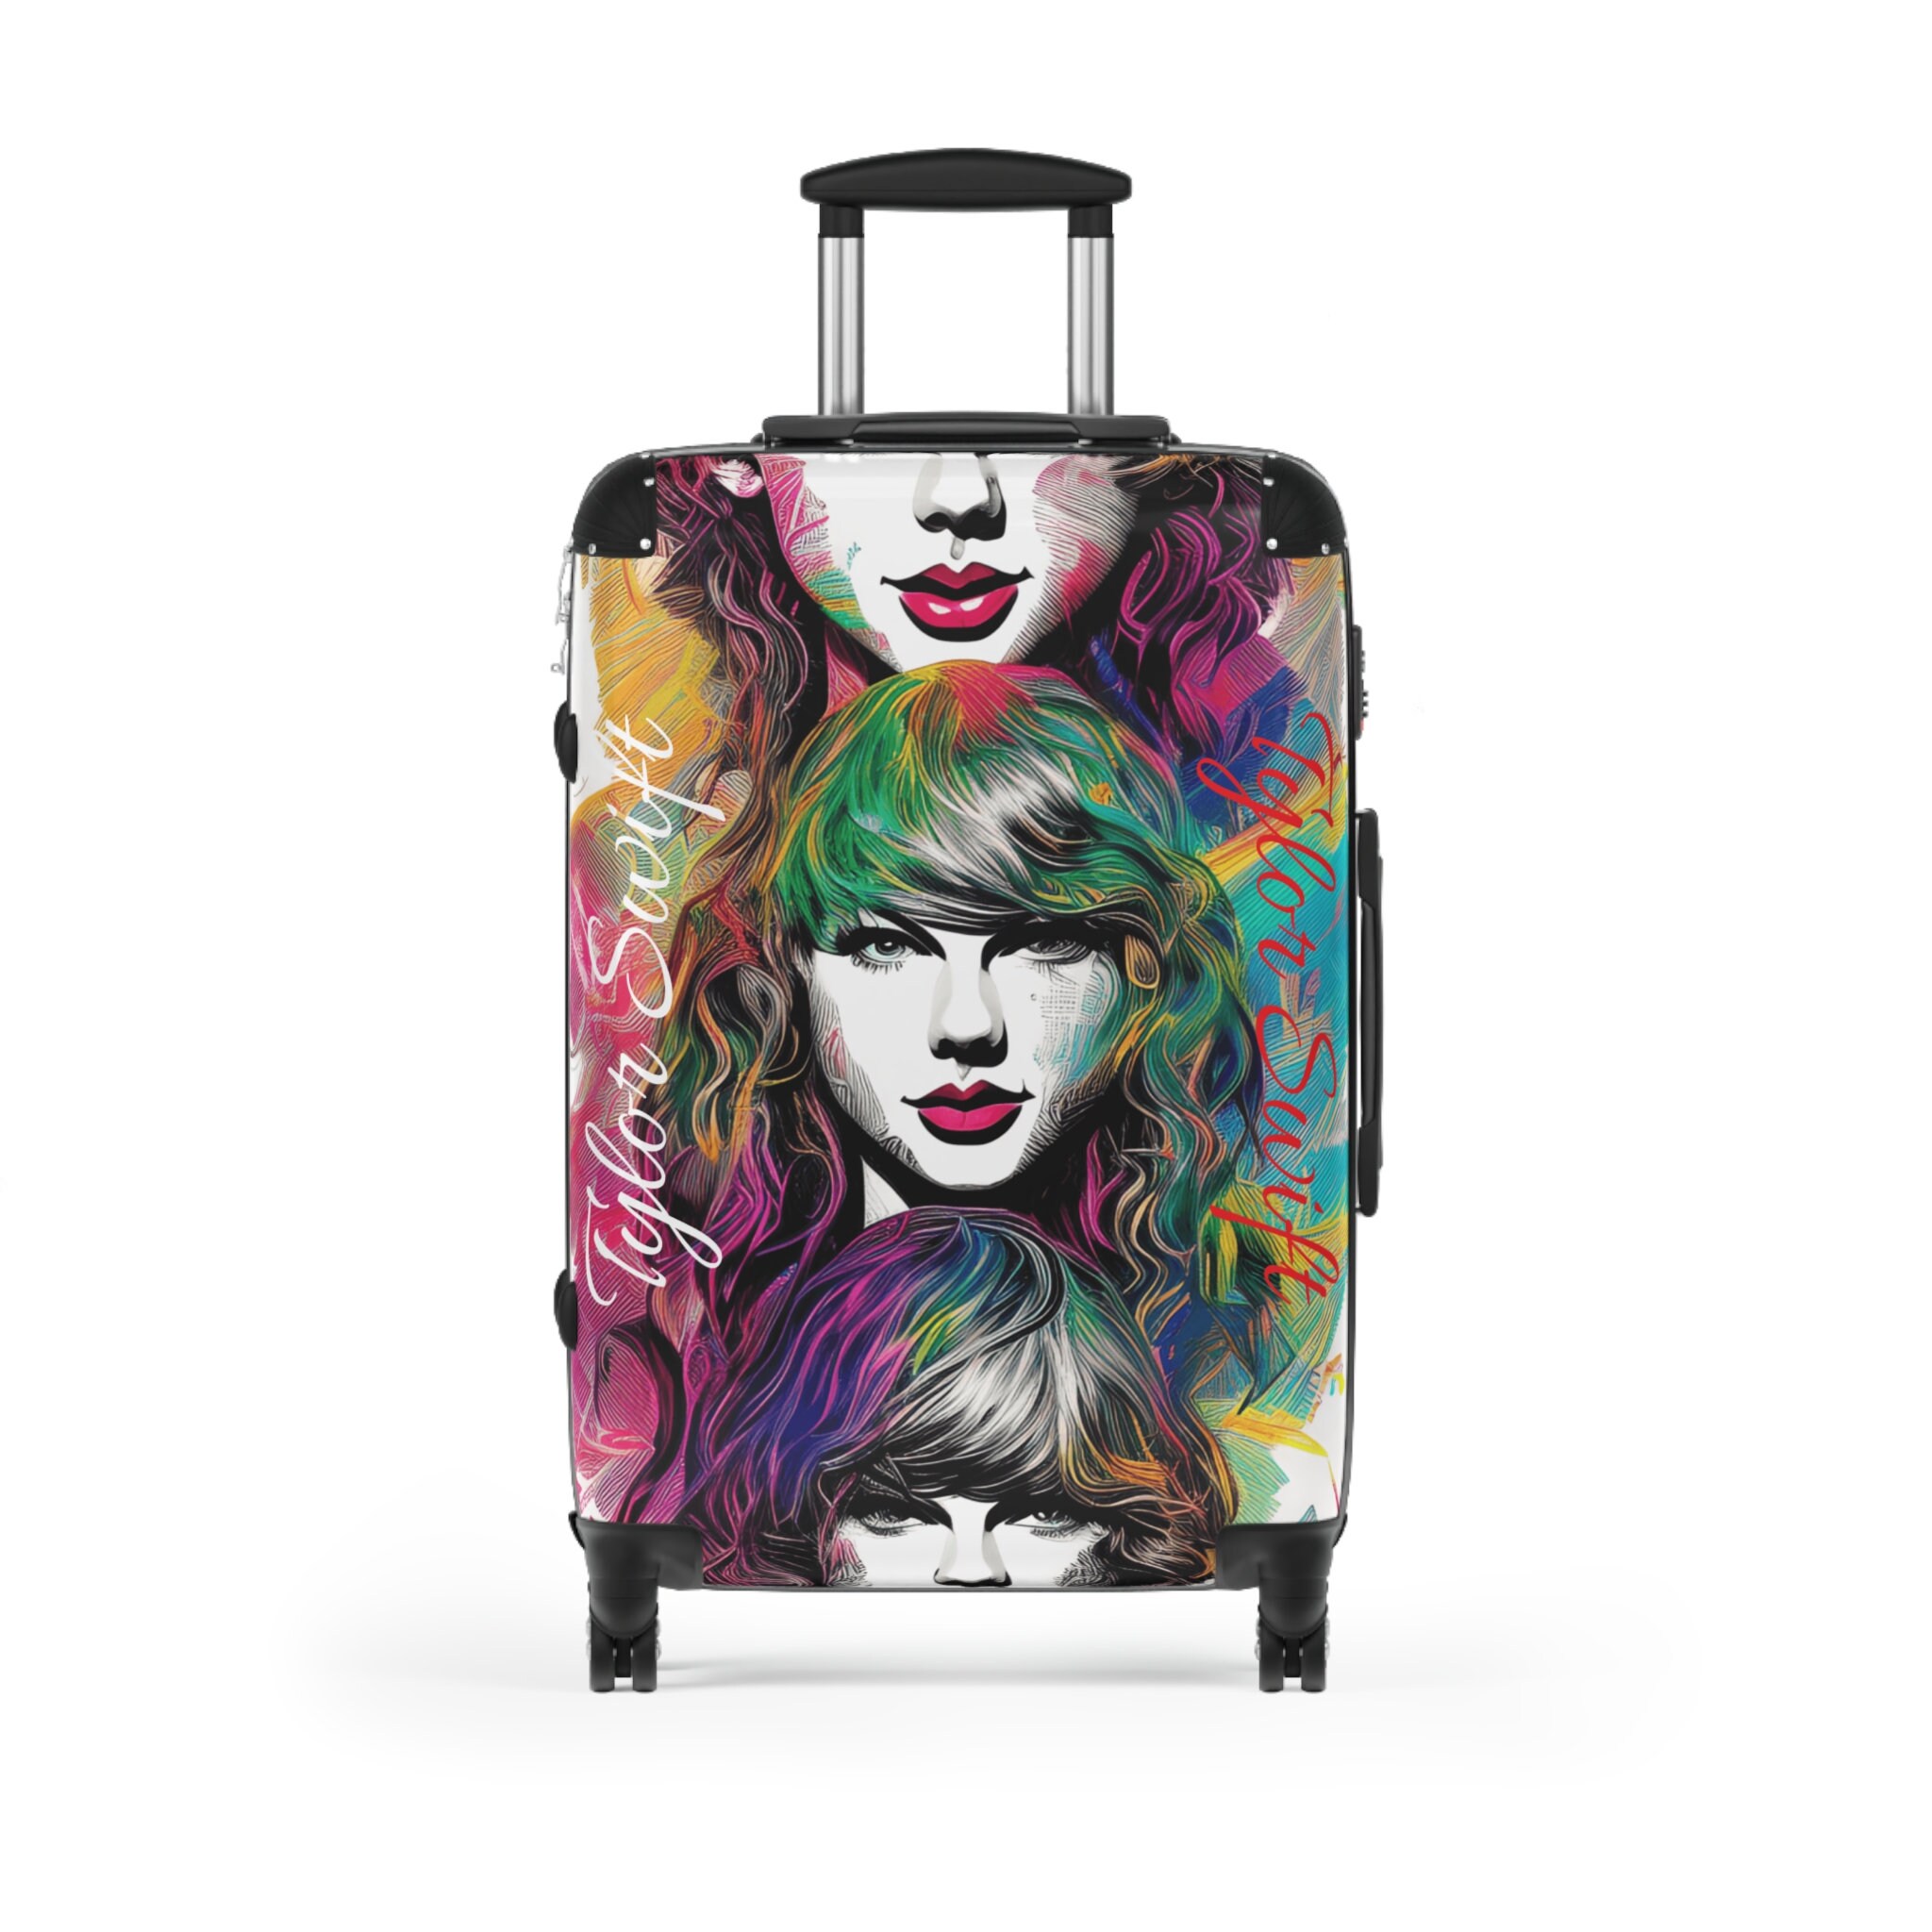 Taylor travel suitcase, Girl's travel luggage